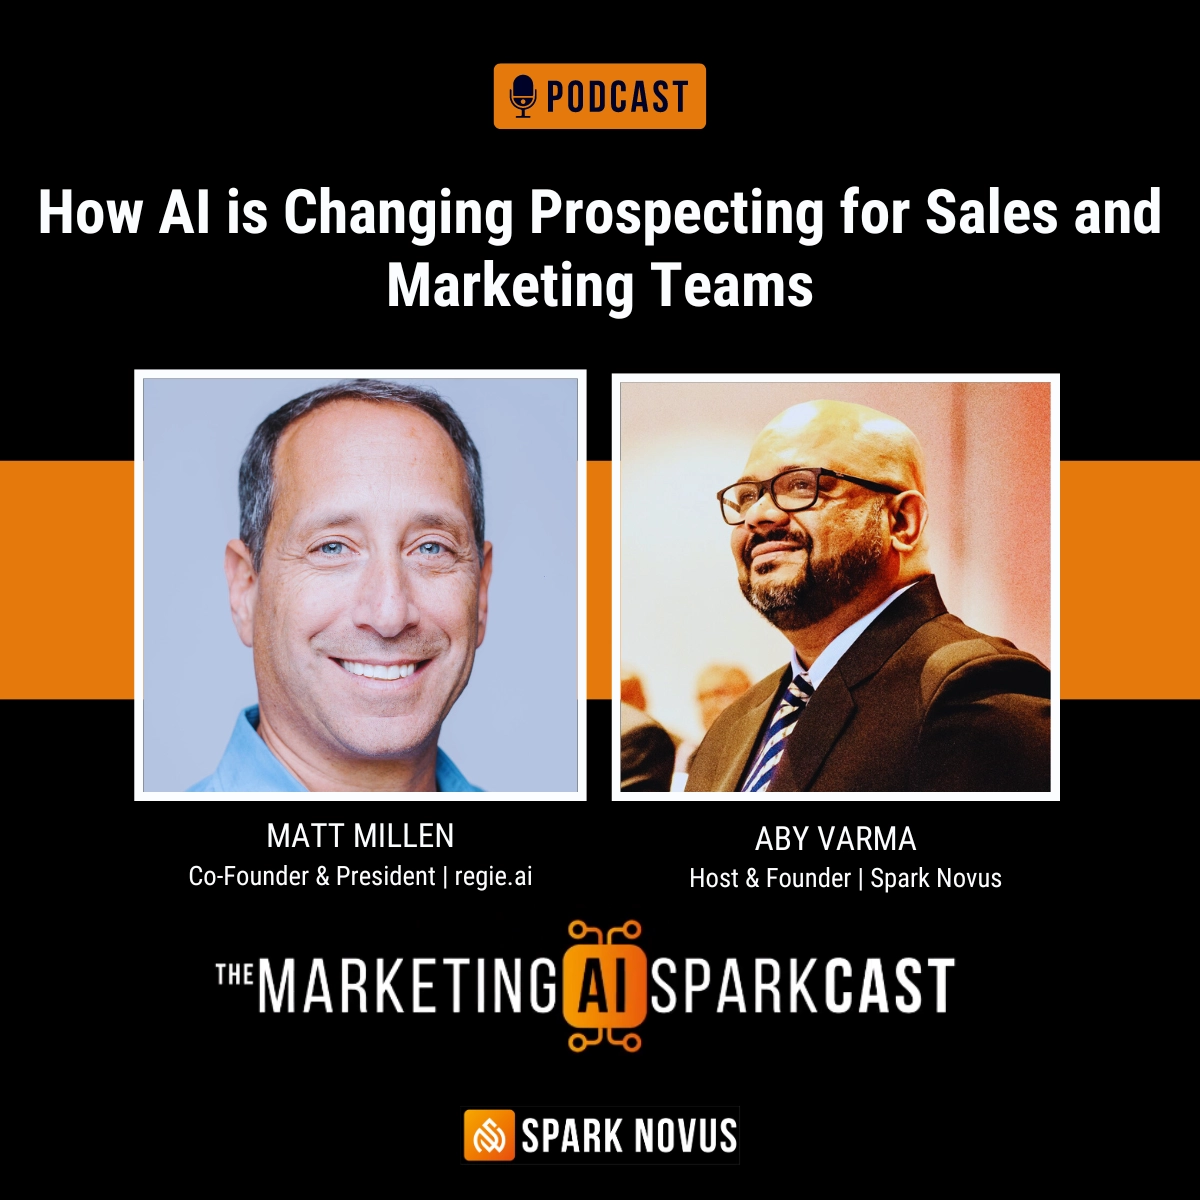 How AI is Changing Prospecting for Sales and Marketing Teams